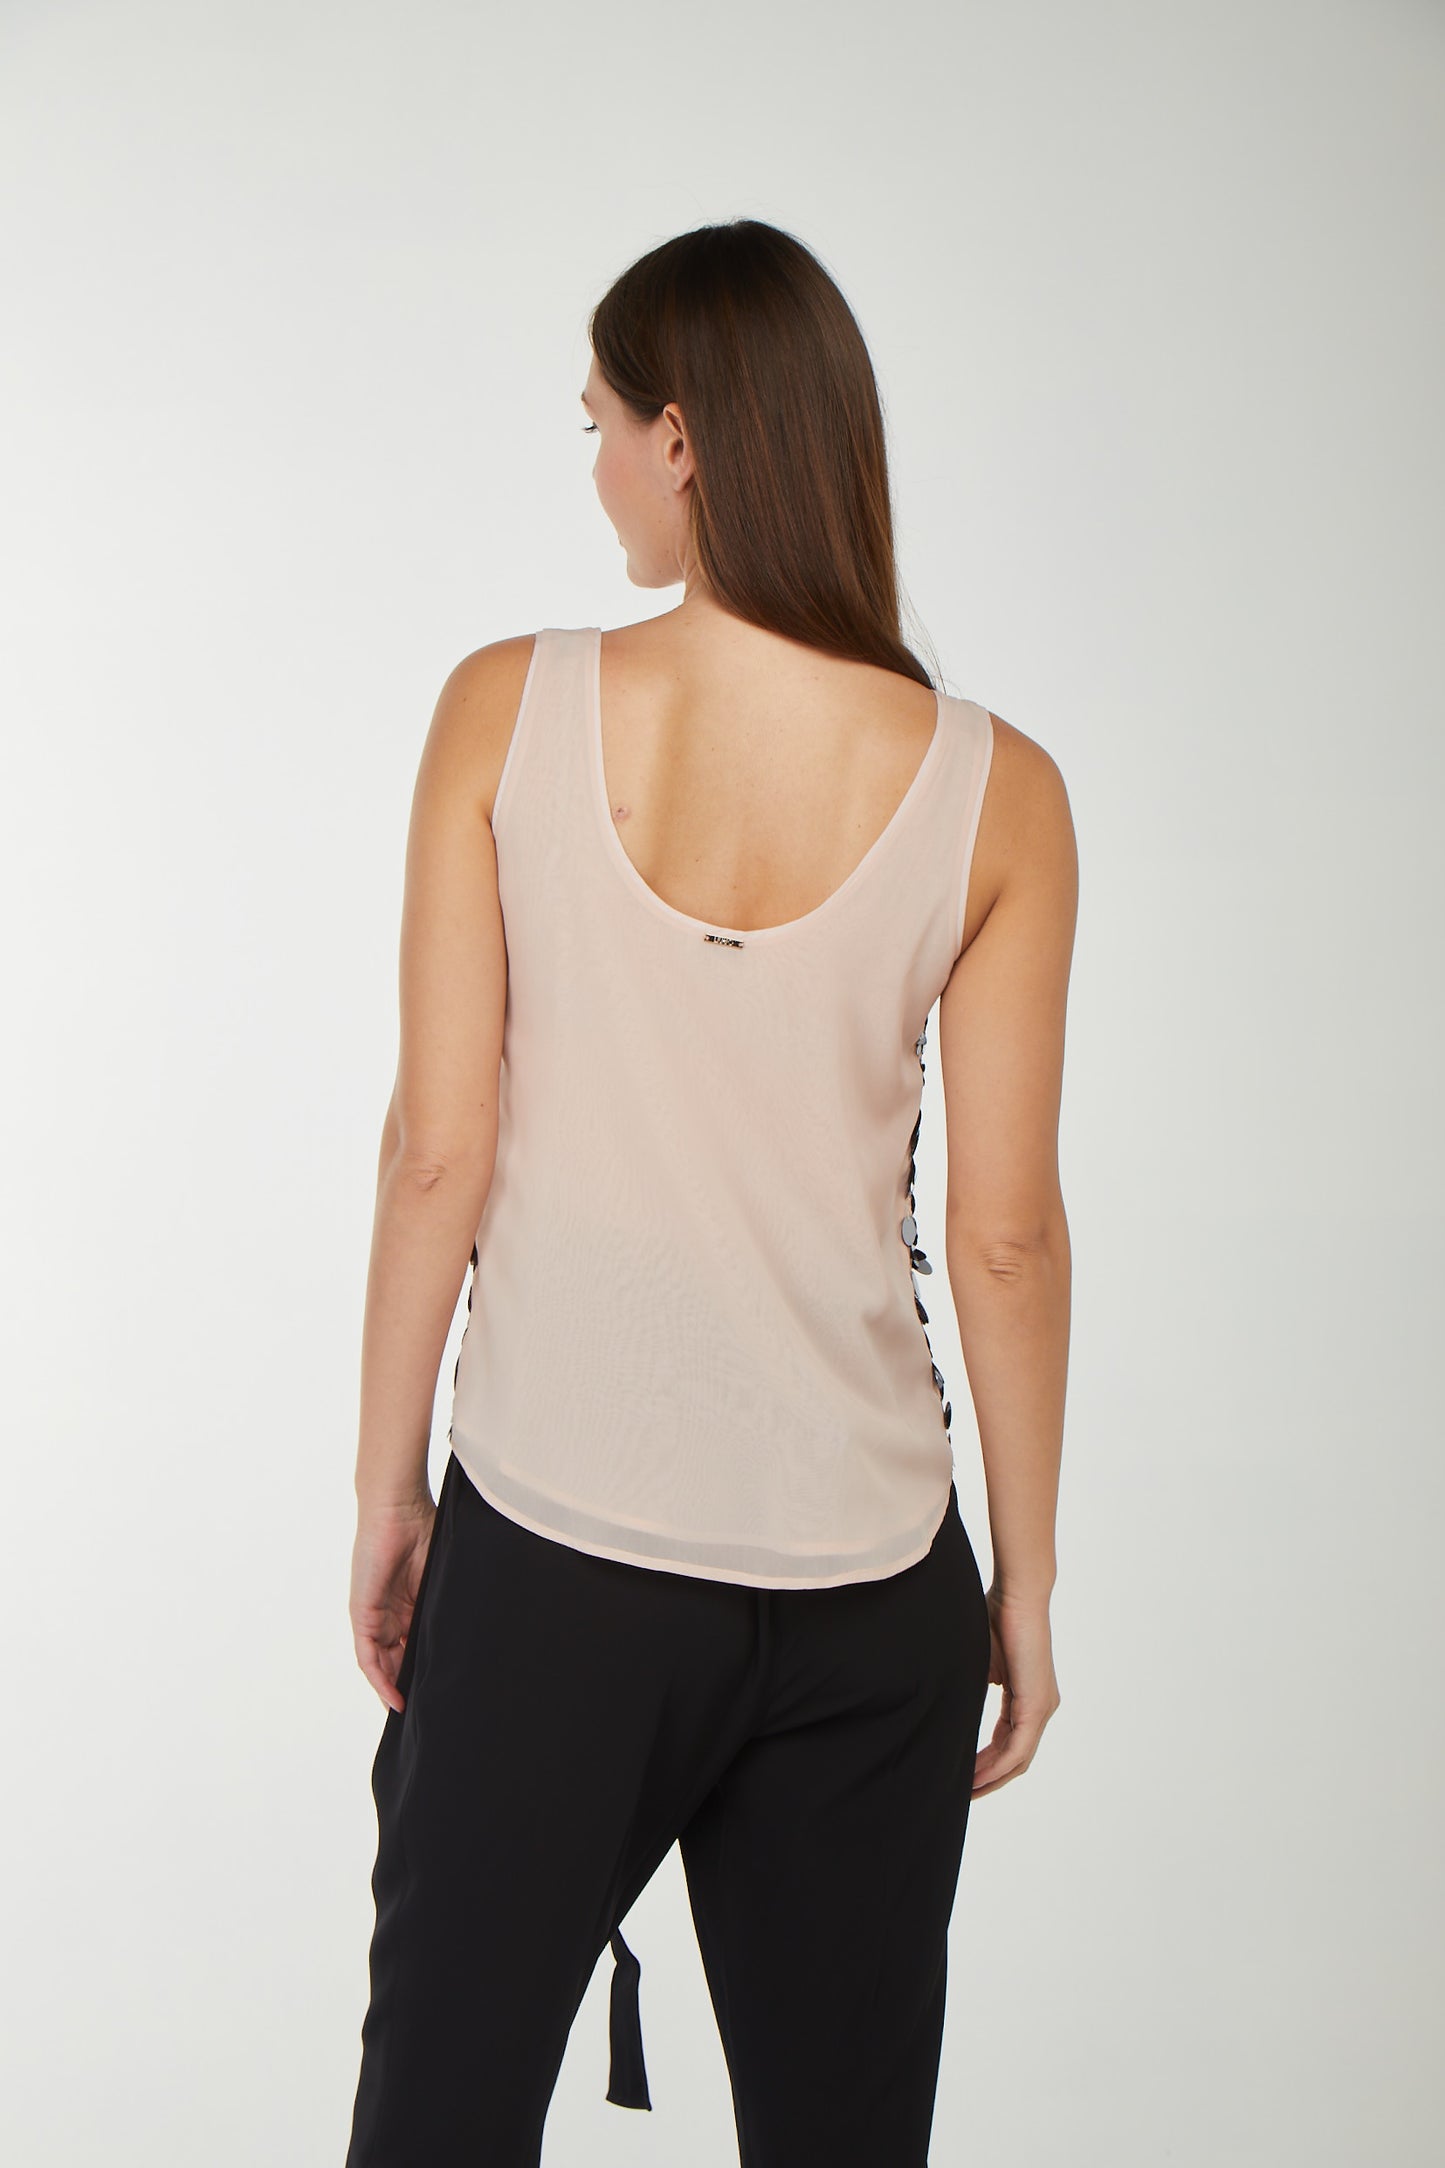 LIU JO Top with Silver Sequins